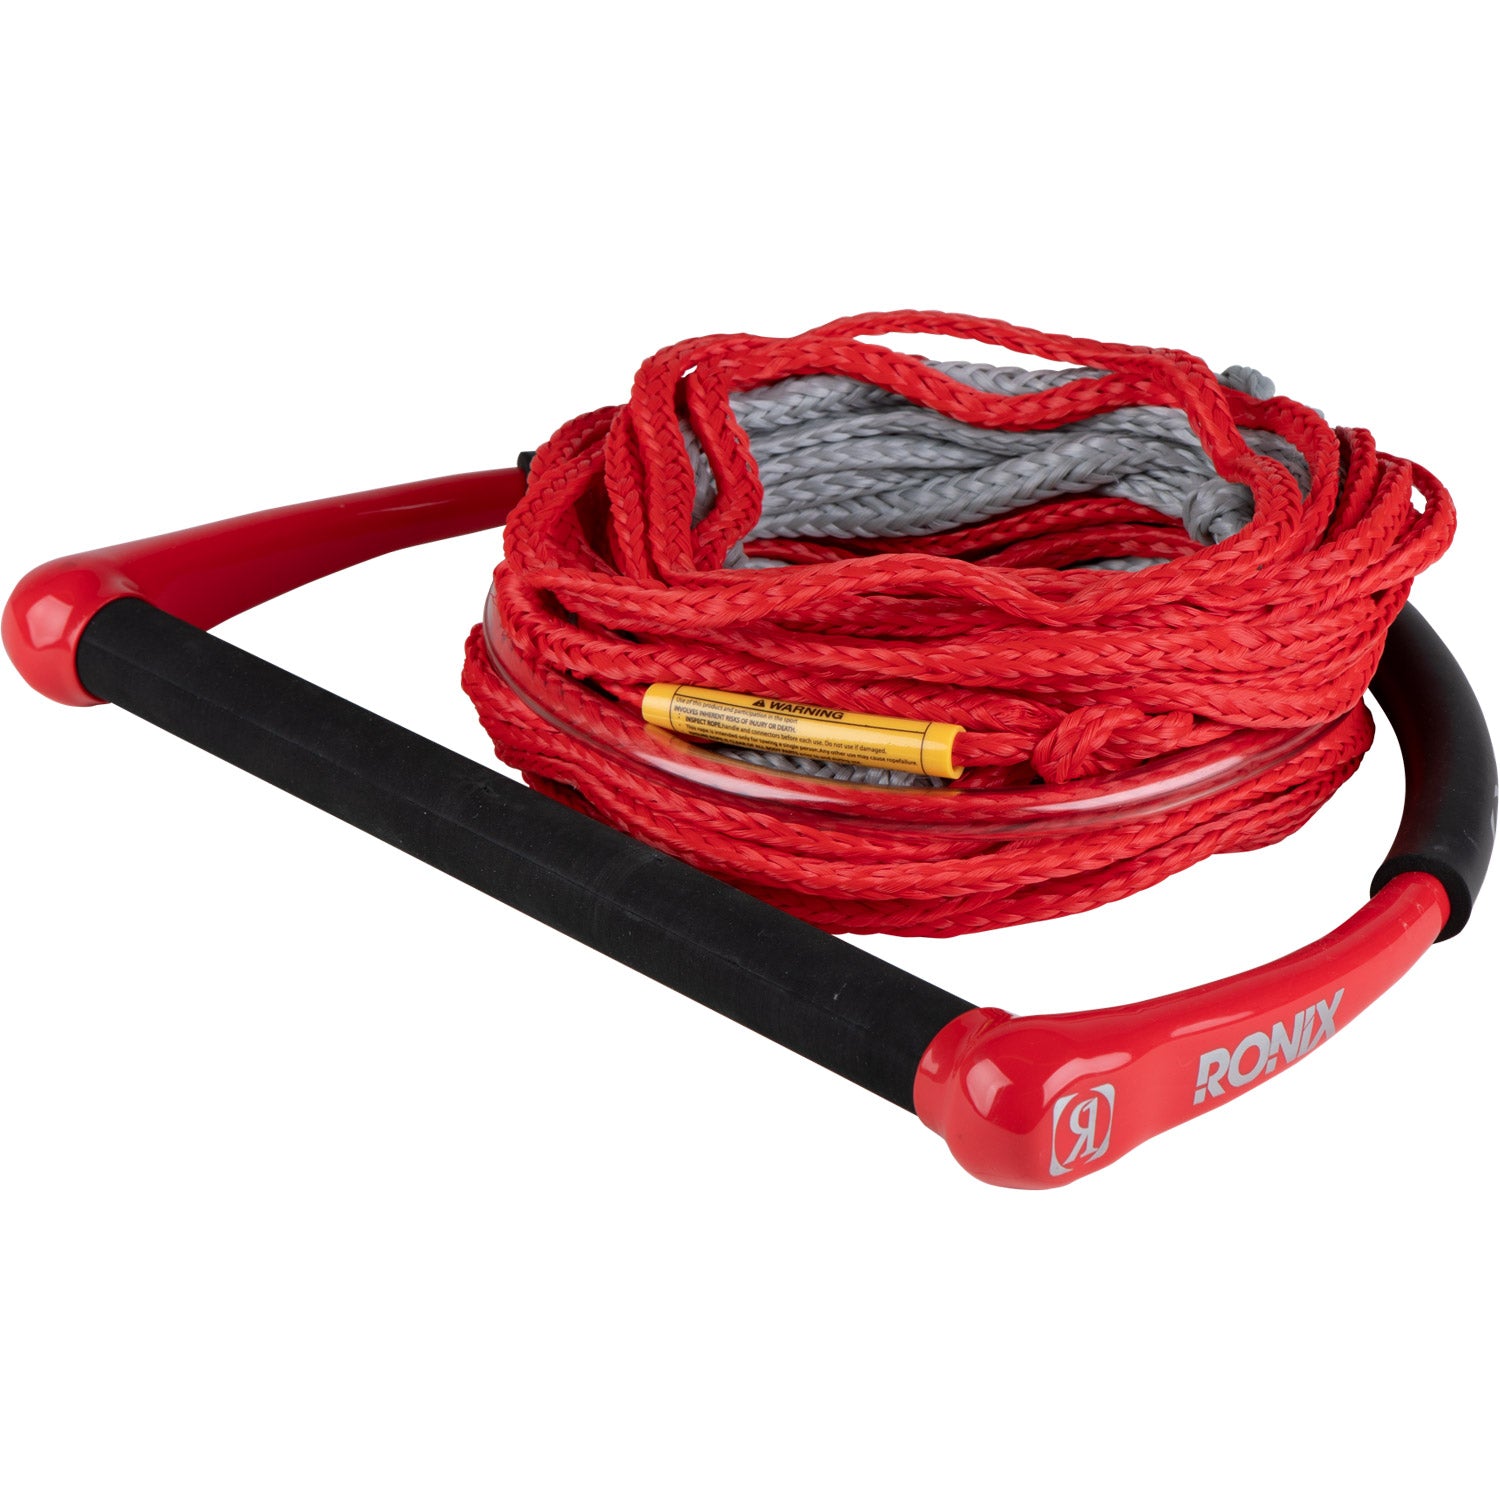 Combo 1.0 Wakeboard Rope Package